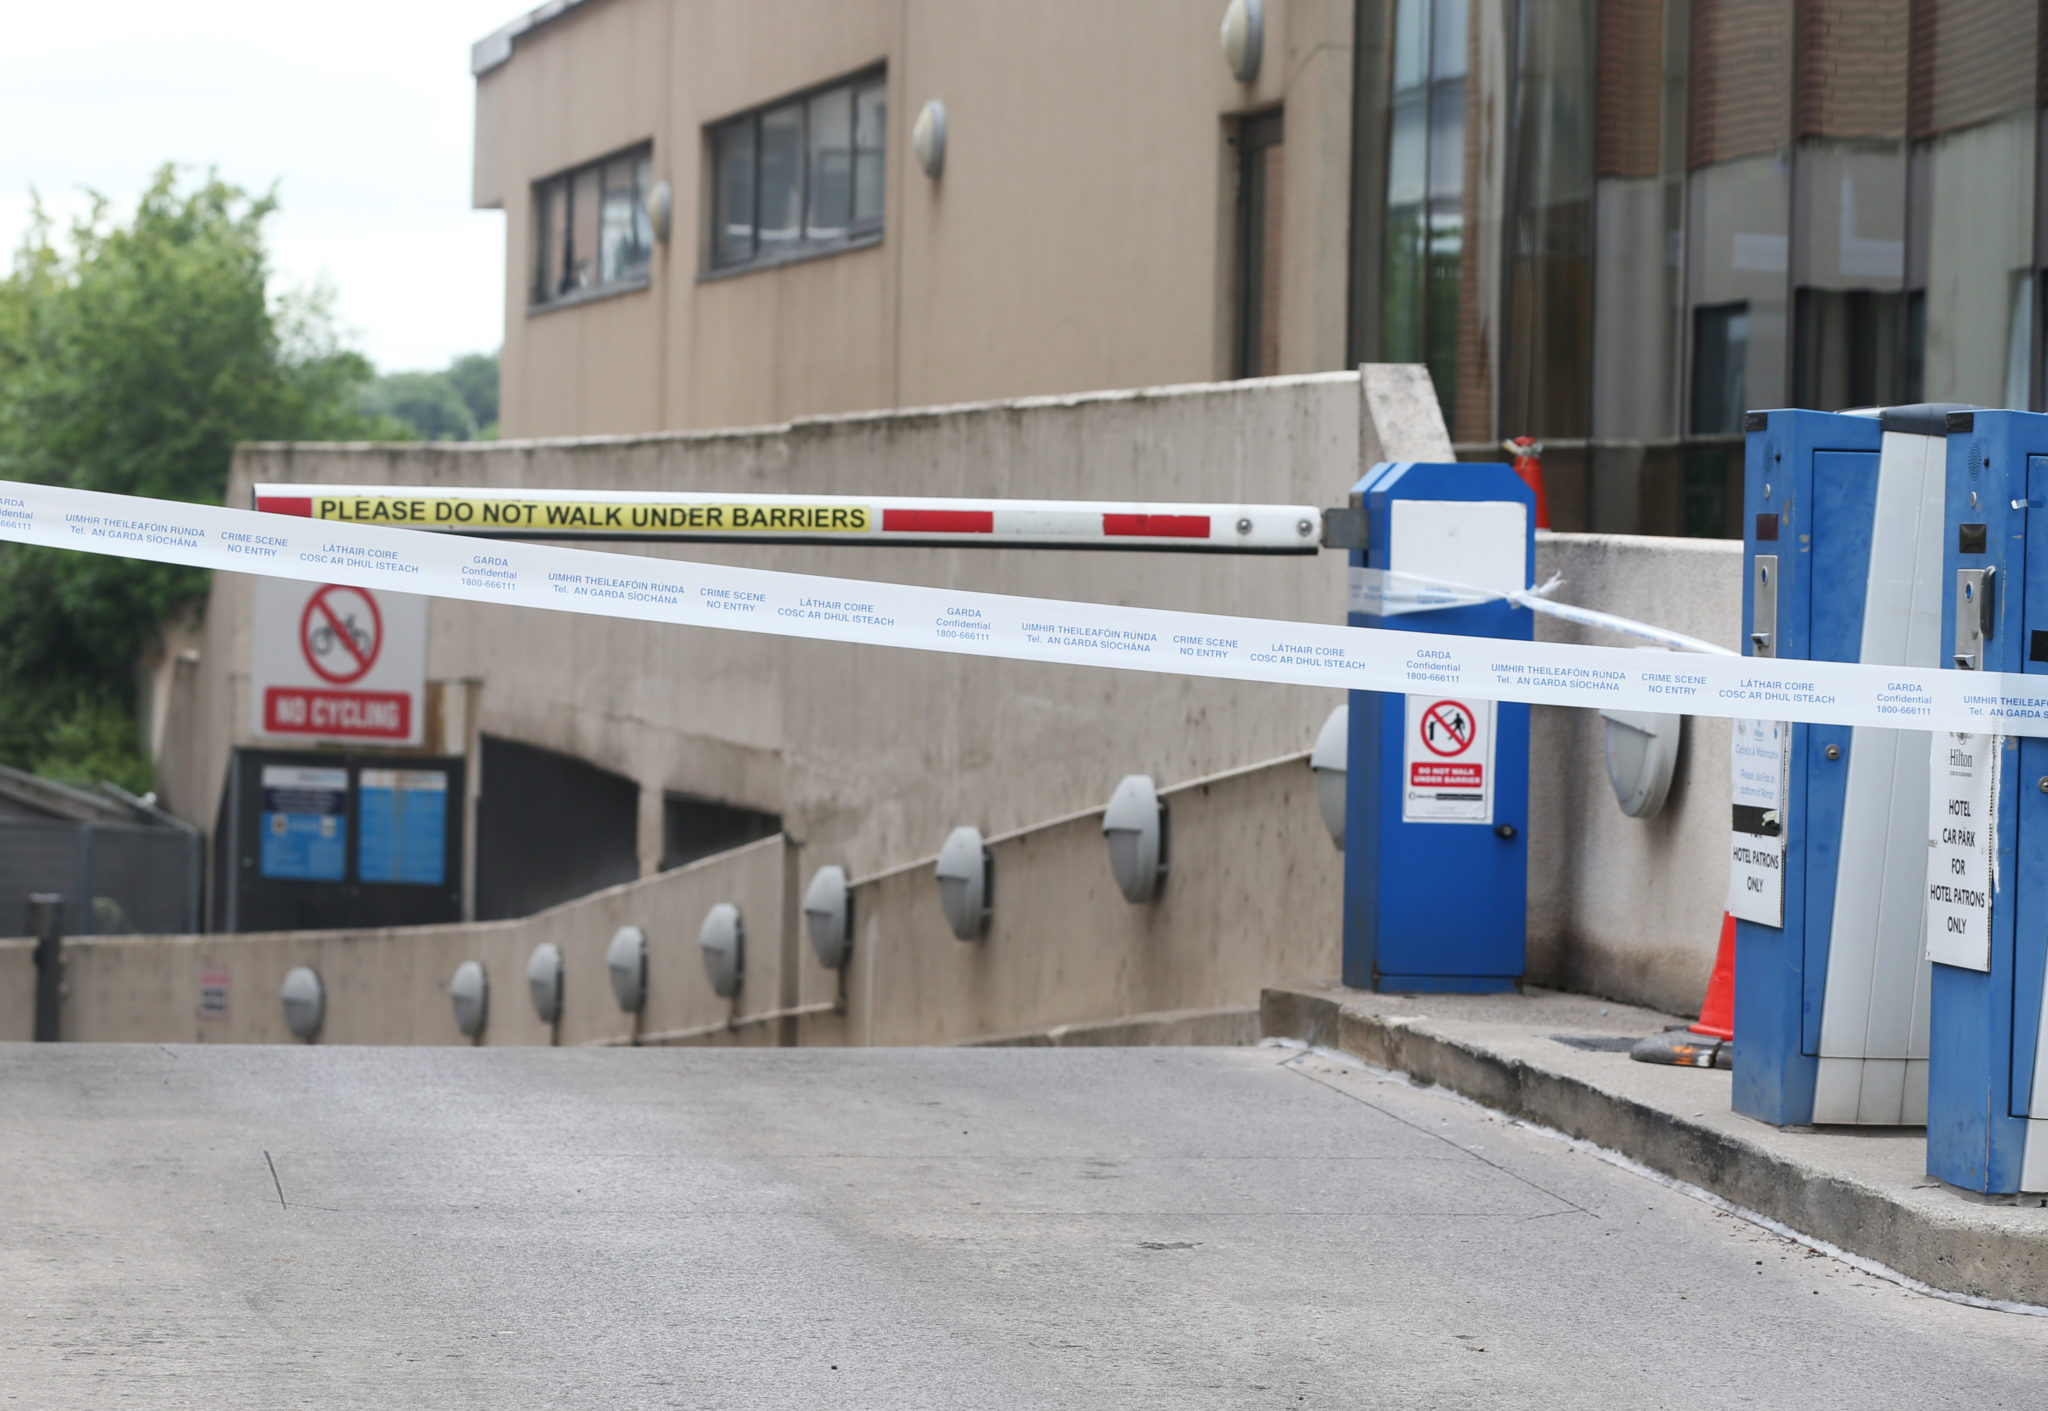 Gardaí at the crime scene outside the Hilton Hotel Kilmainham this afternoon, 24-06-2022. Image: Leah Farrell/RollingNews